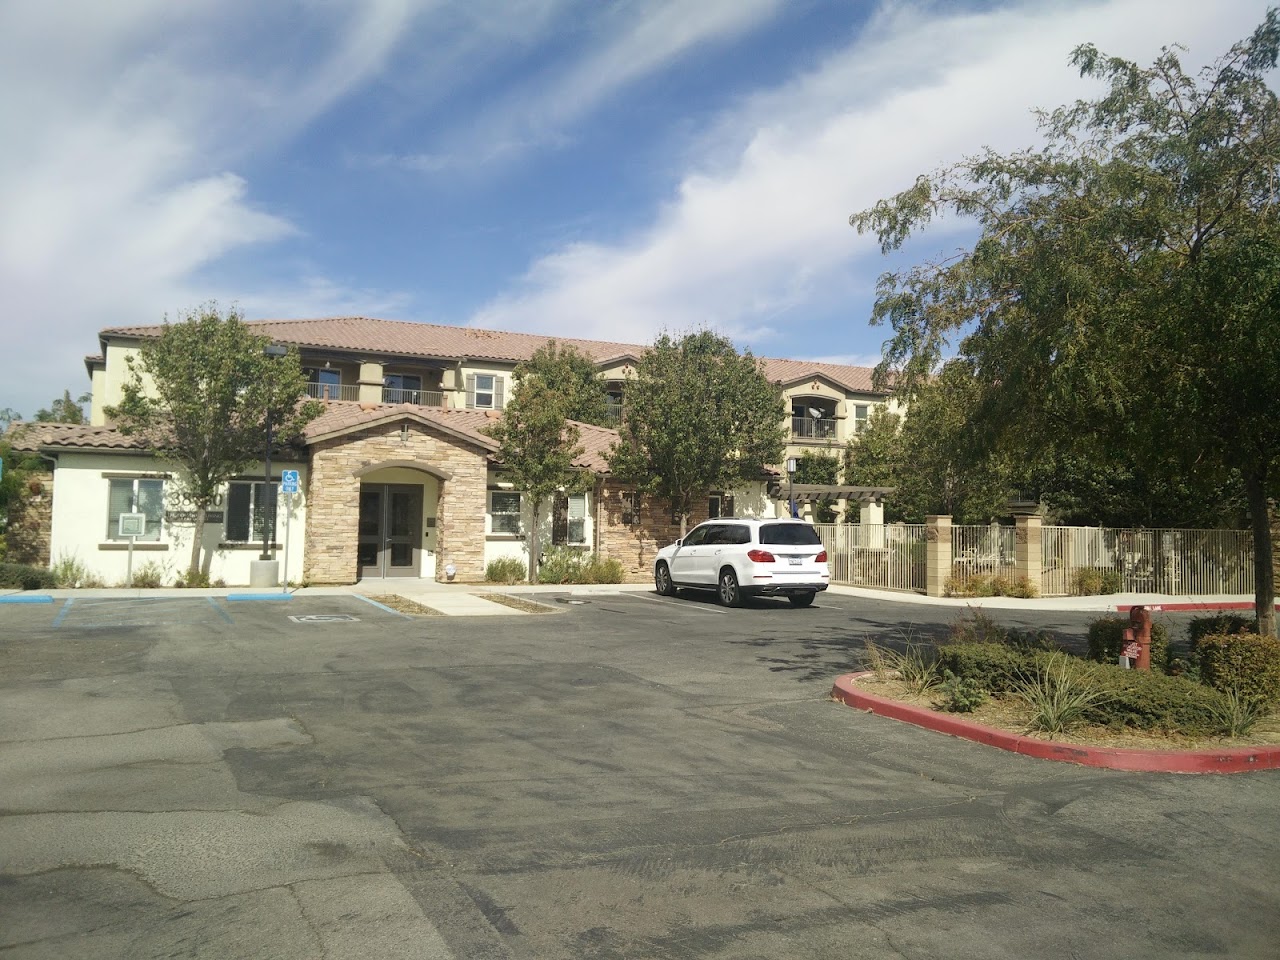 Photo of DESERT SENIOR LIVING at 38780 ORCHID VIEW PL PALMDALE, CA 93550